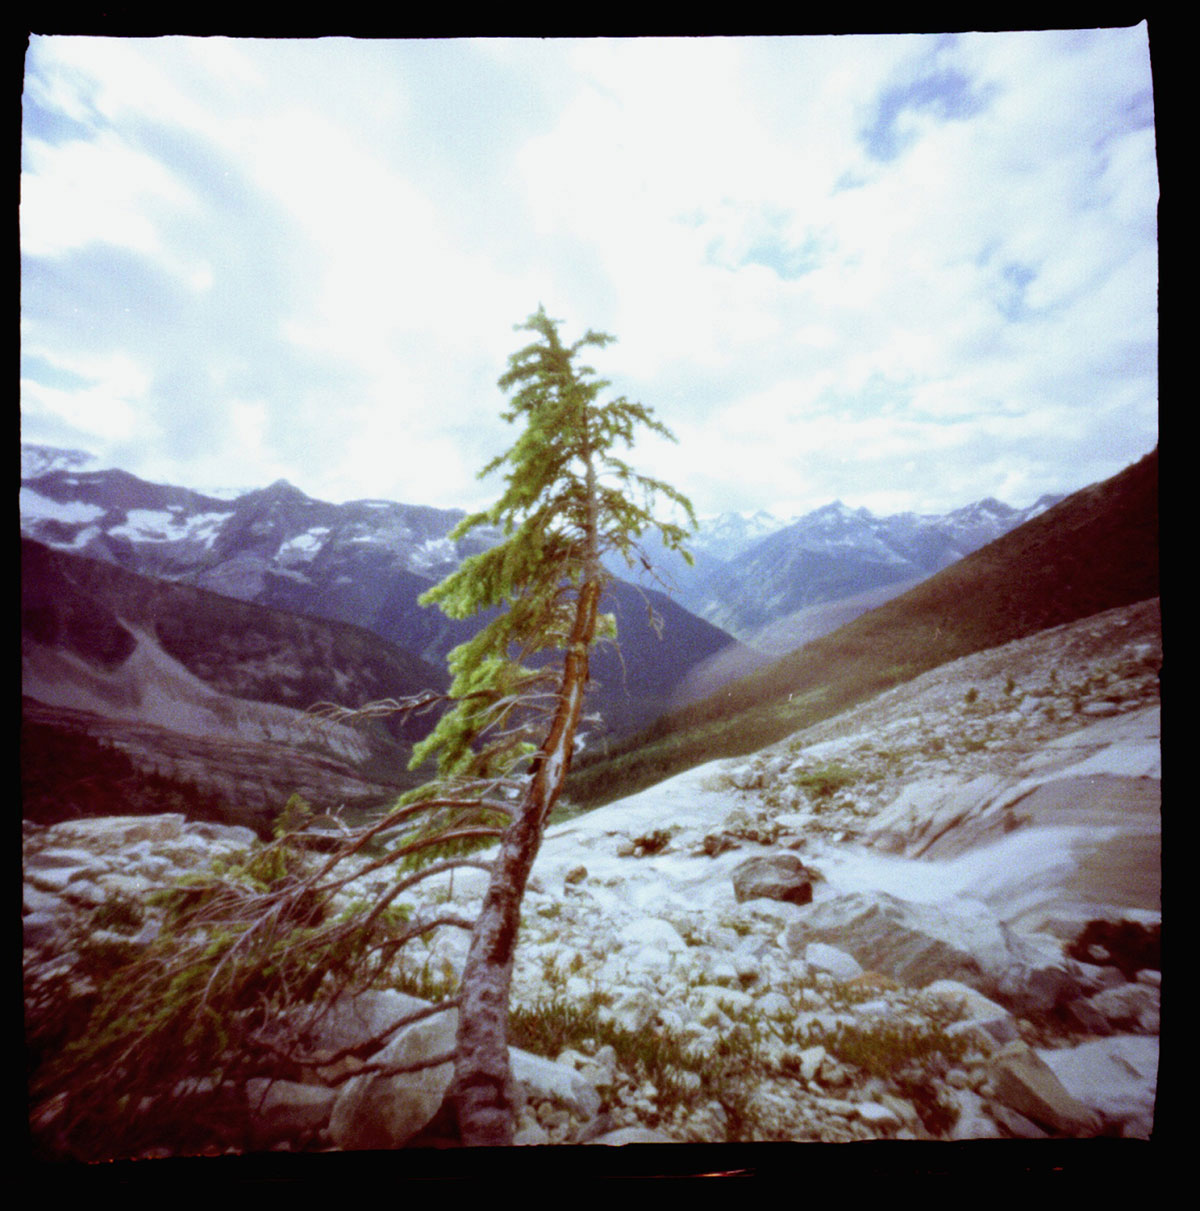 wheeler-hut-expedition_01_lone-tree_rogers-pass-alberta_2000_dianne-bos